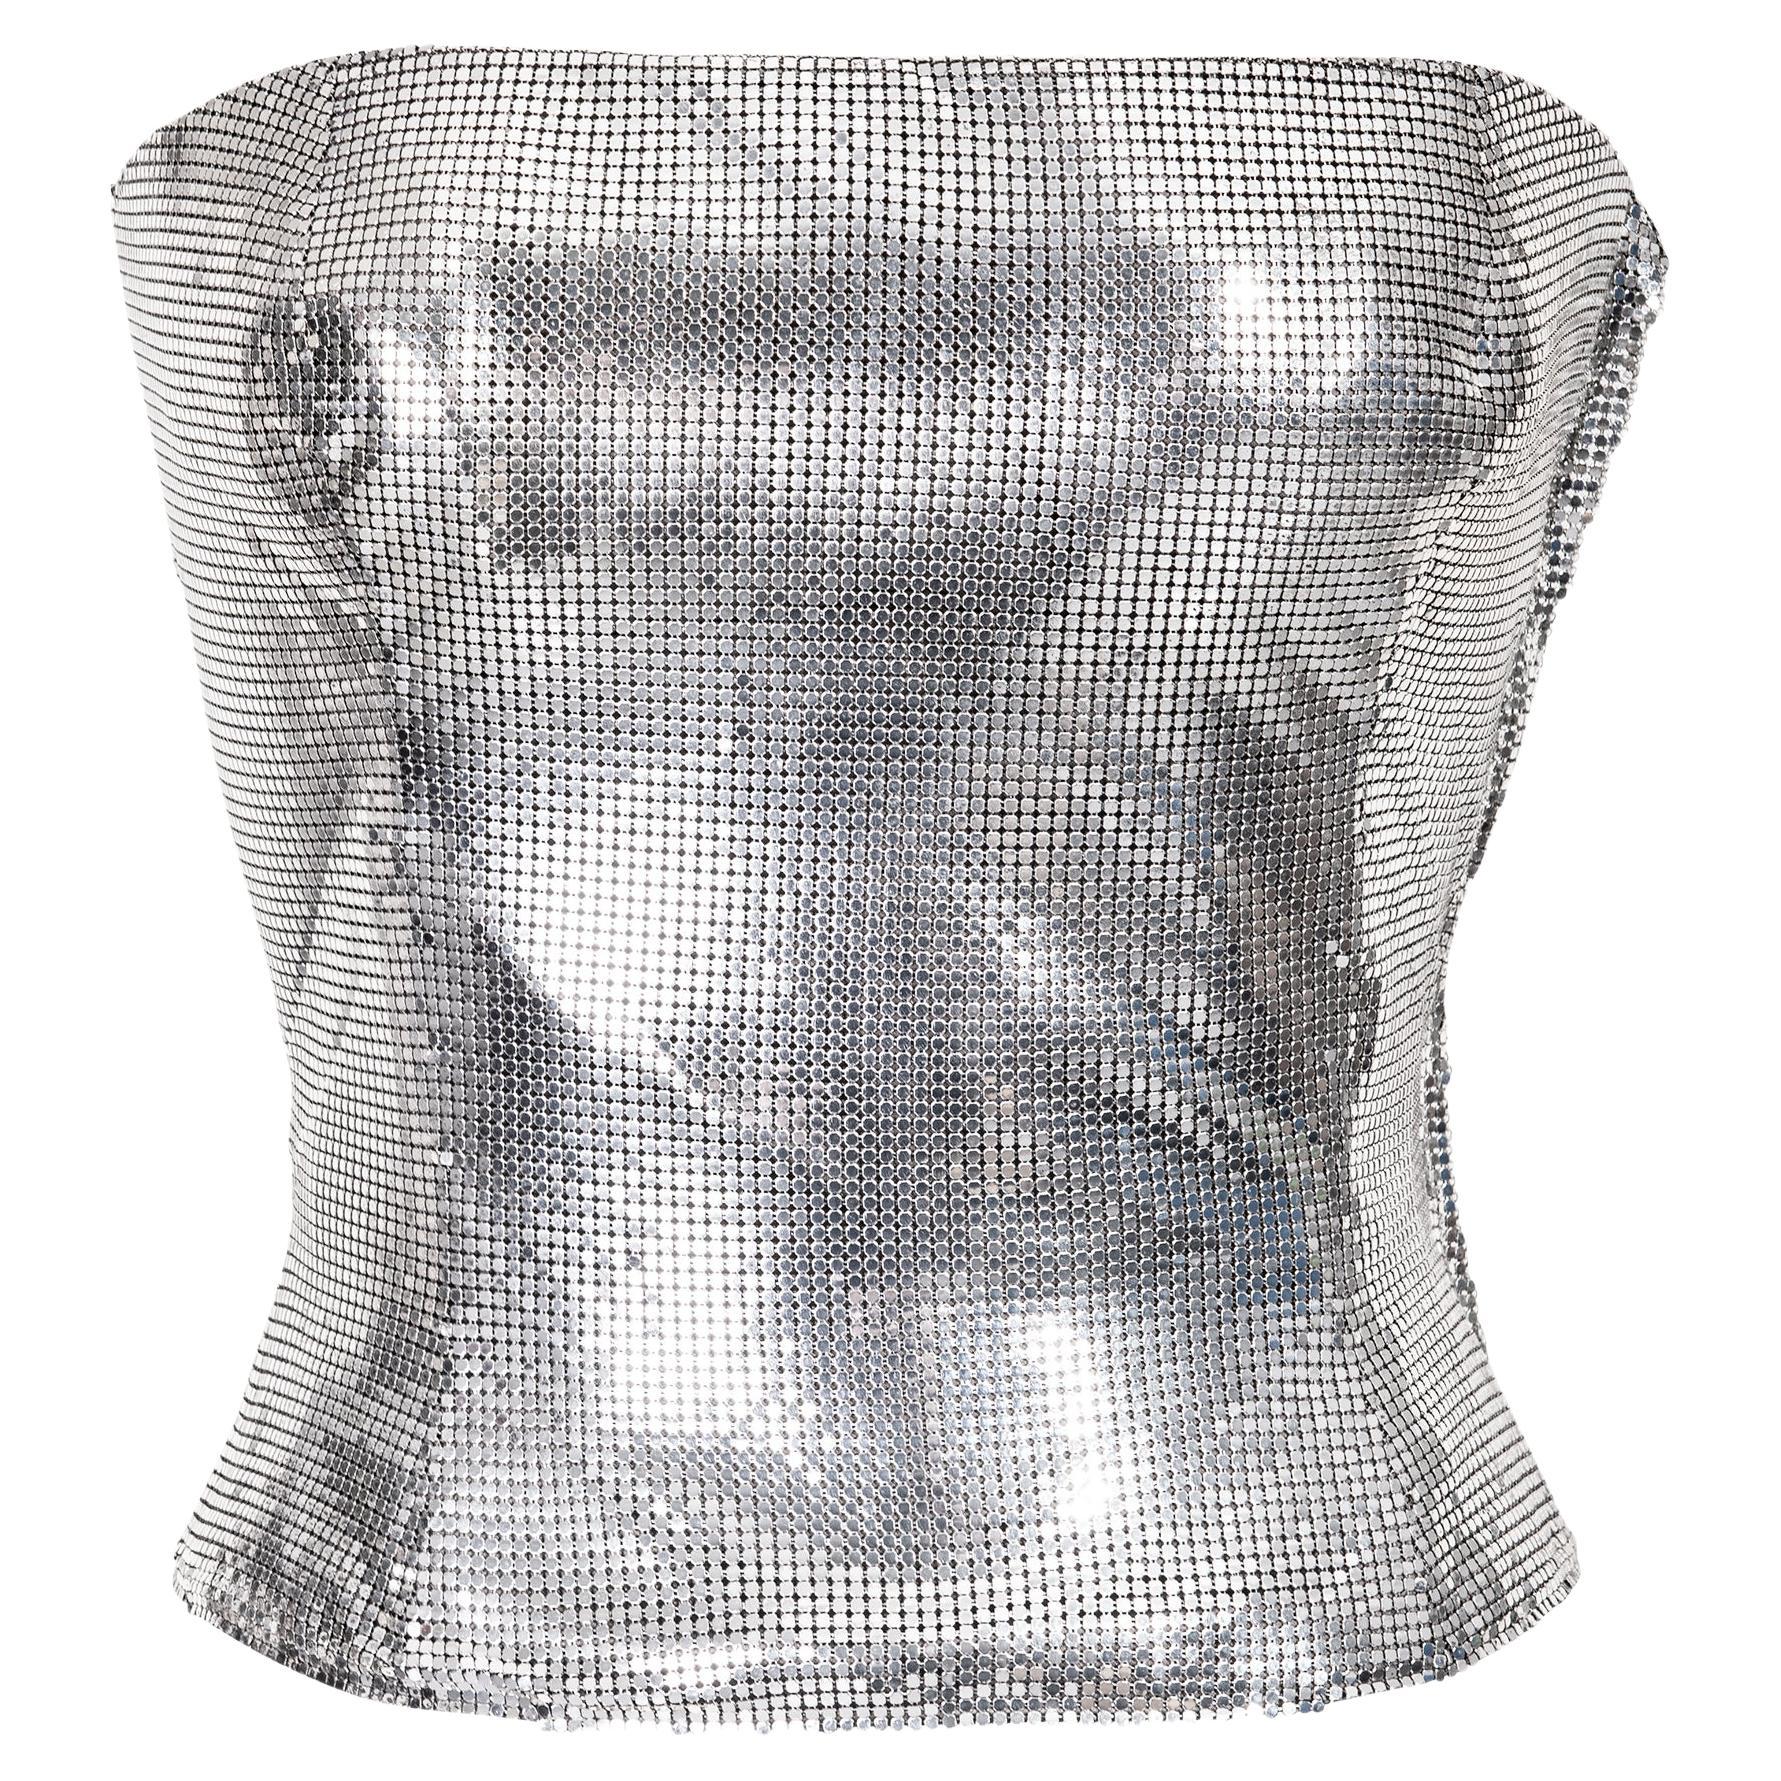 A/W 1998 Gianni Versace Silver Oroton Chainmail Corset